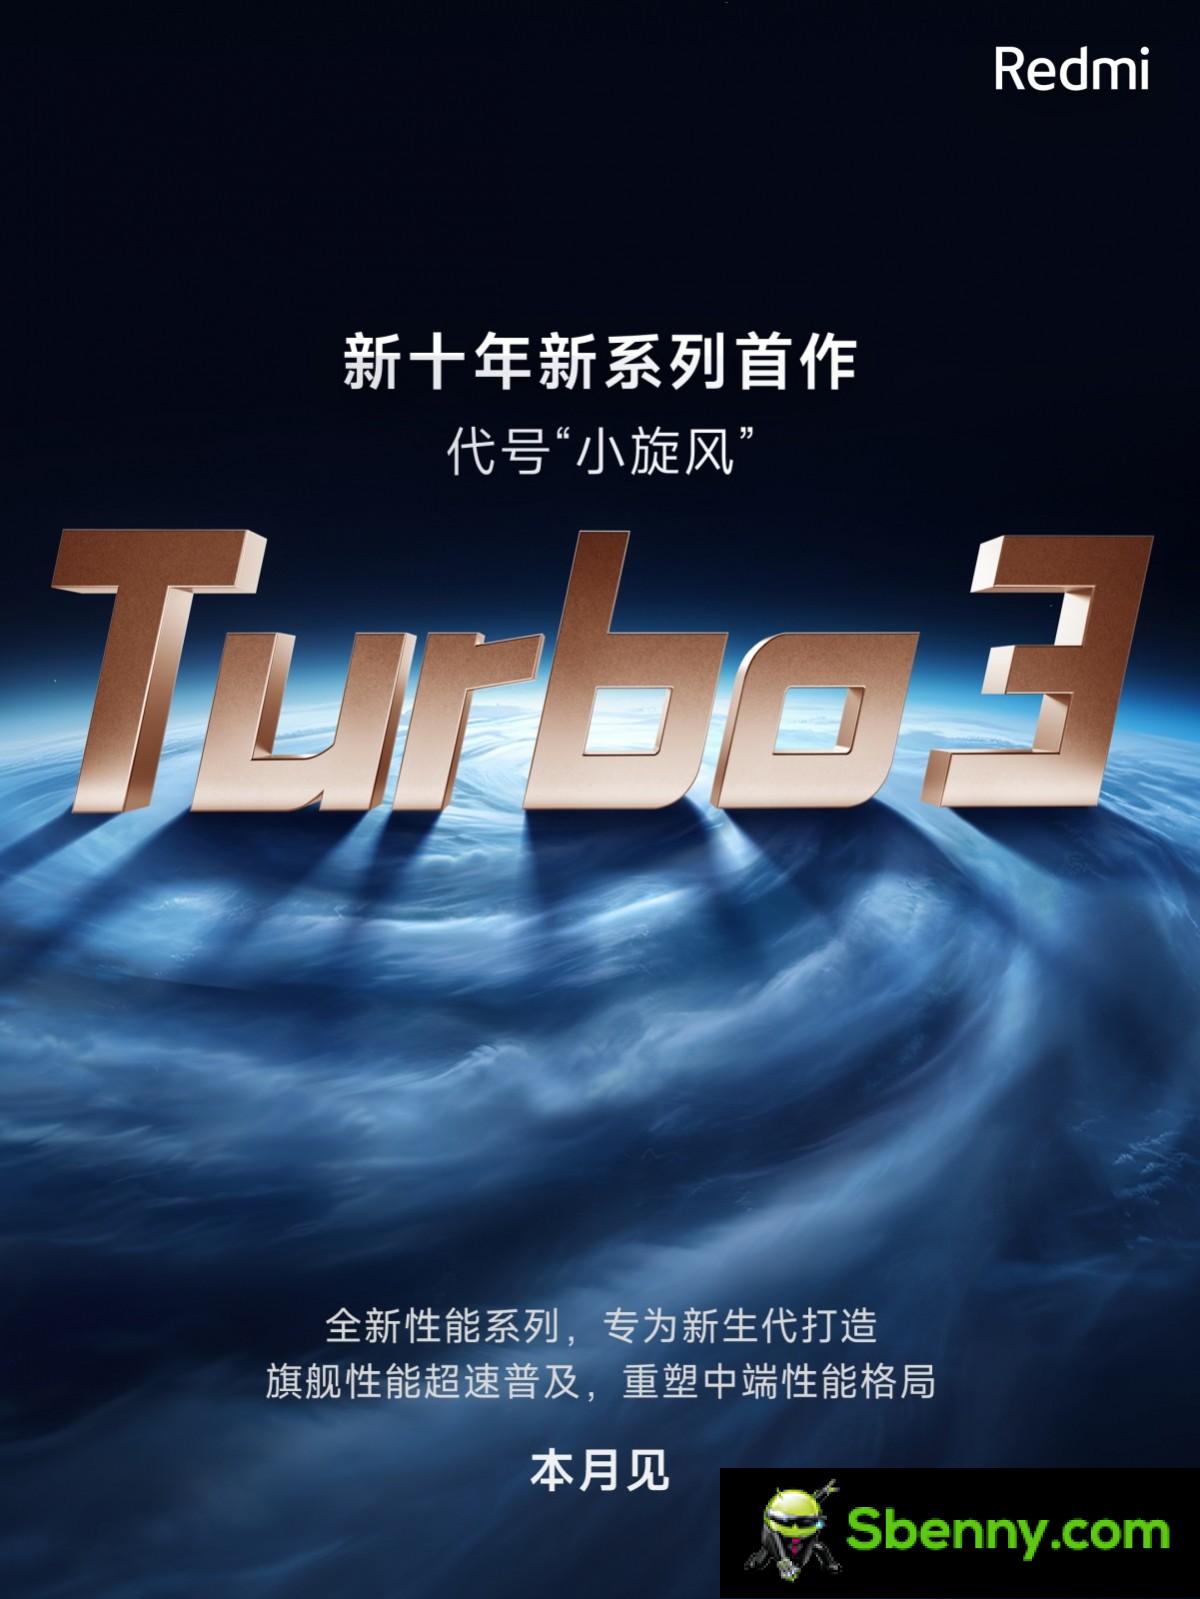 Redmi announces Turbo 3 as part of the new generation of high-performance flagship series